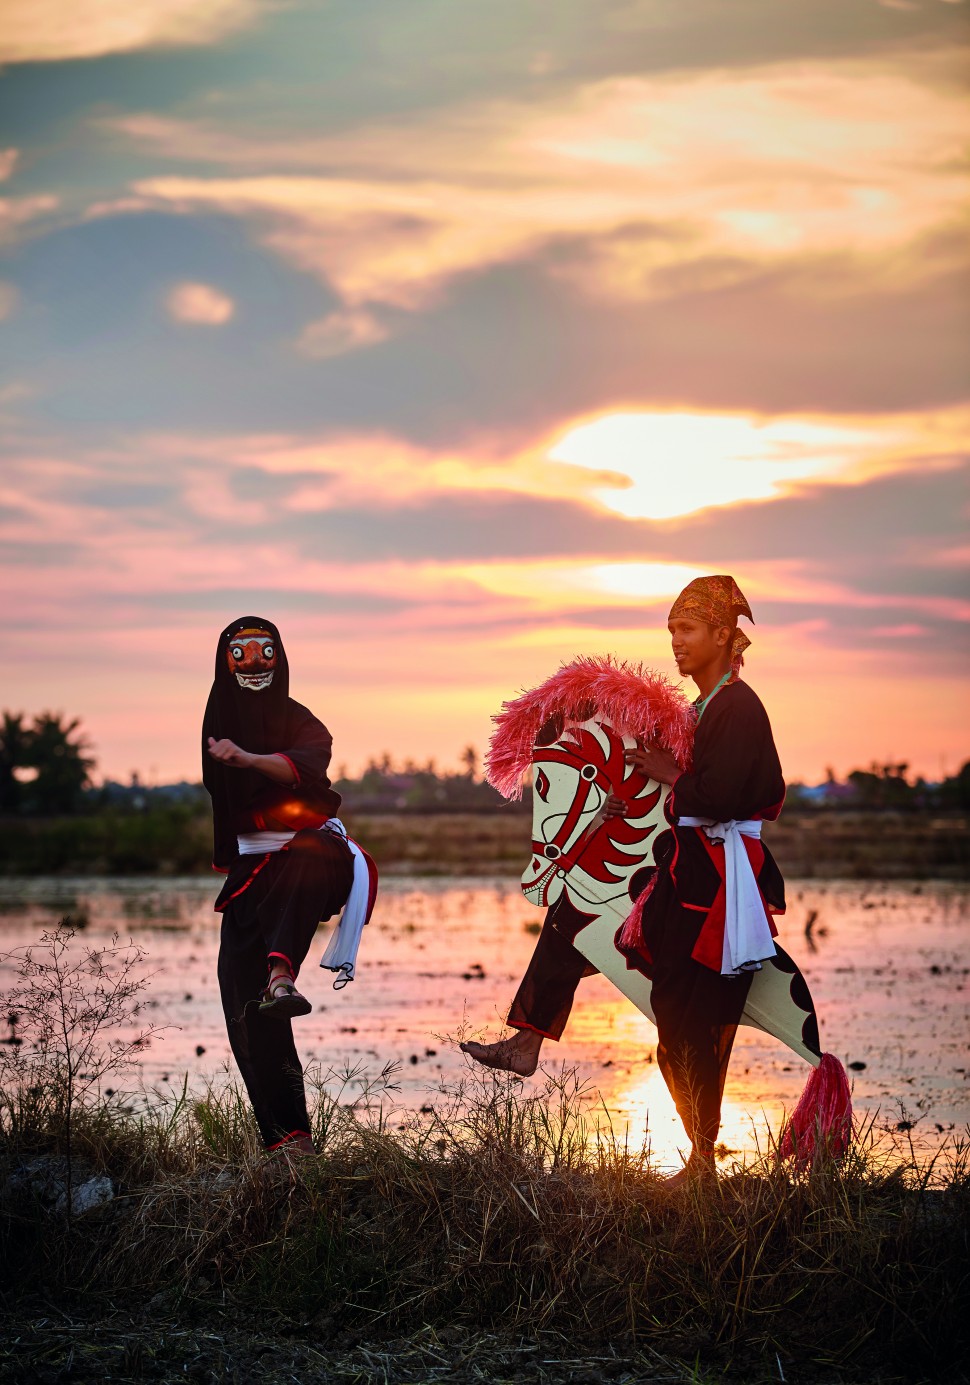 Originally from Java, the kuda kepang dance is so named because of its movements, which resemble a galloping horse